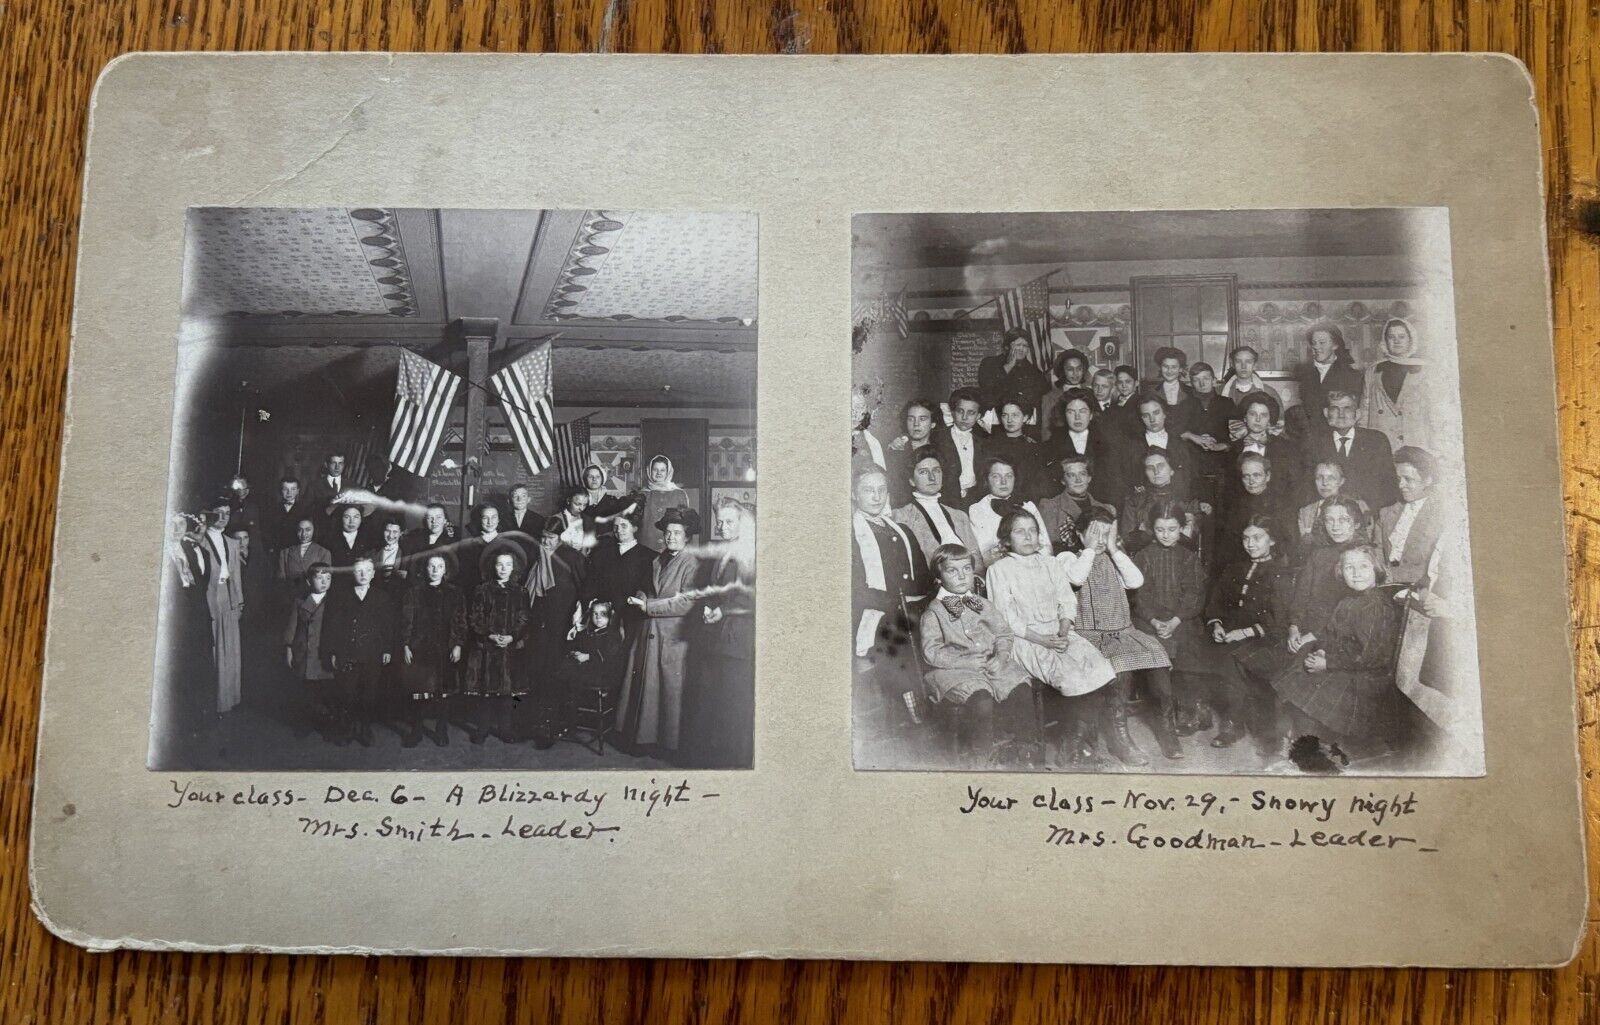 Cool Vintage Sepia Victorian Group Photos Inside Schoolhouse